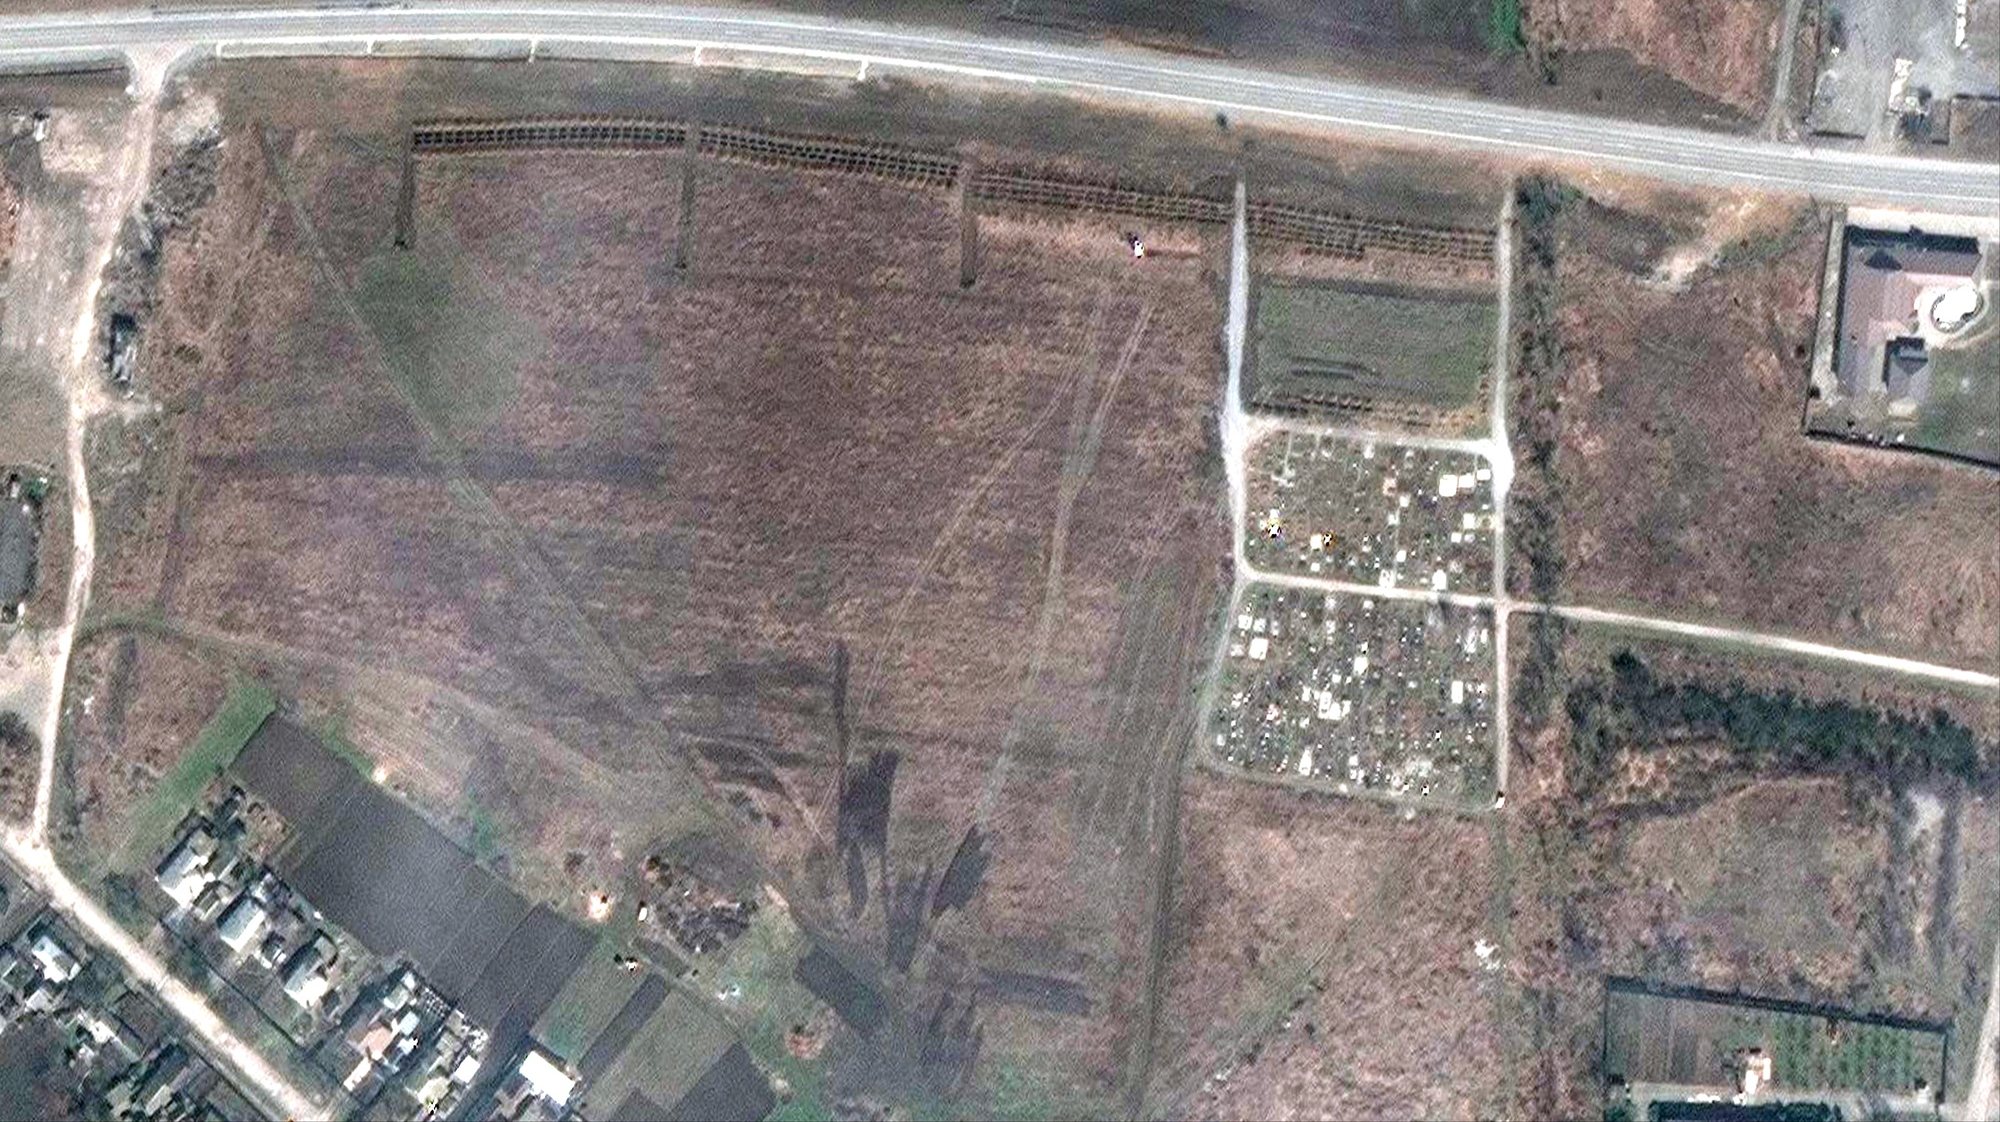 epa09900942 A handout satellite image made available by Maxar Technologies claims to show a mass grave site adjacent to an existing village cemetery on the northwestern edge of Manhush, some 20 kilometers west of Mariupol, Ukraine, 03 April 2022 (issued 21 April 2022). Maxar has reviewed satellite images from mid-March through mid-April, and indicate that the expansion of the new set of graves began between 23 to 26 March 2022 and continued to expand. The graves are aligned in four sections of linear rows (measuring approximately 85 meters per section) and contain more than 200 new graves, Maxar states.  EPA/MAXAR TECHNOLOGIES HANDOUT -- MANDATORY CREDIT: SATELLITE IMAGE 2022 MAXAR TECHNOLOGIES -- THE WATERMARK MAY NOT BE REMOVED/CROPPED -- HANDOUT EDITORIAL USE ONLY/NO SALES